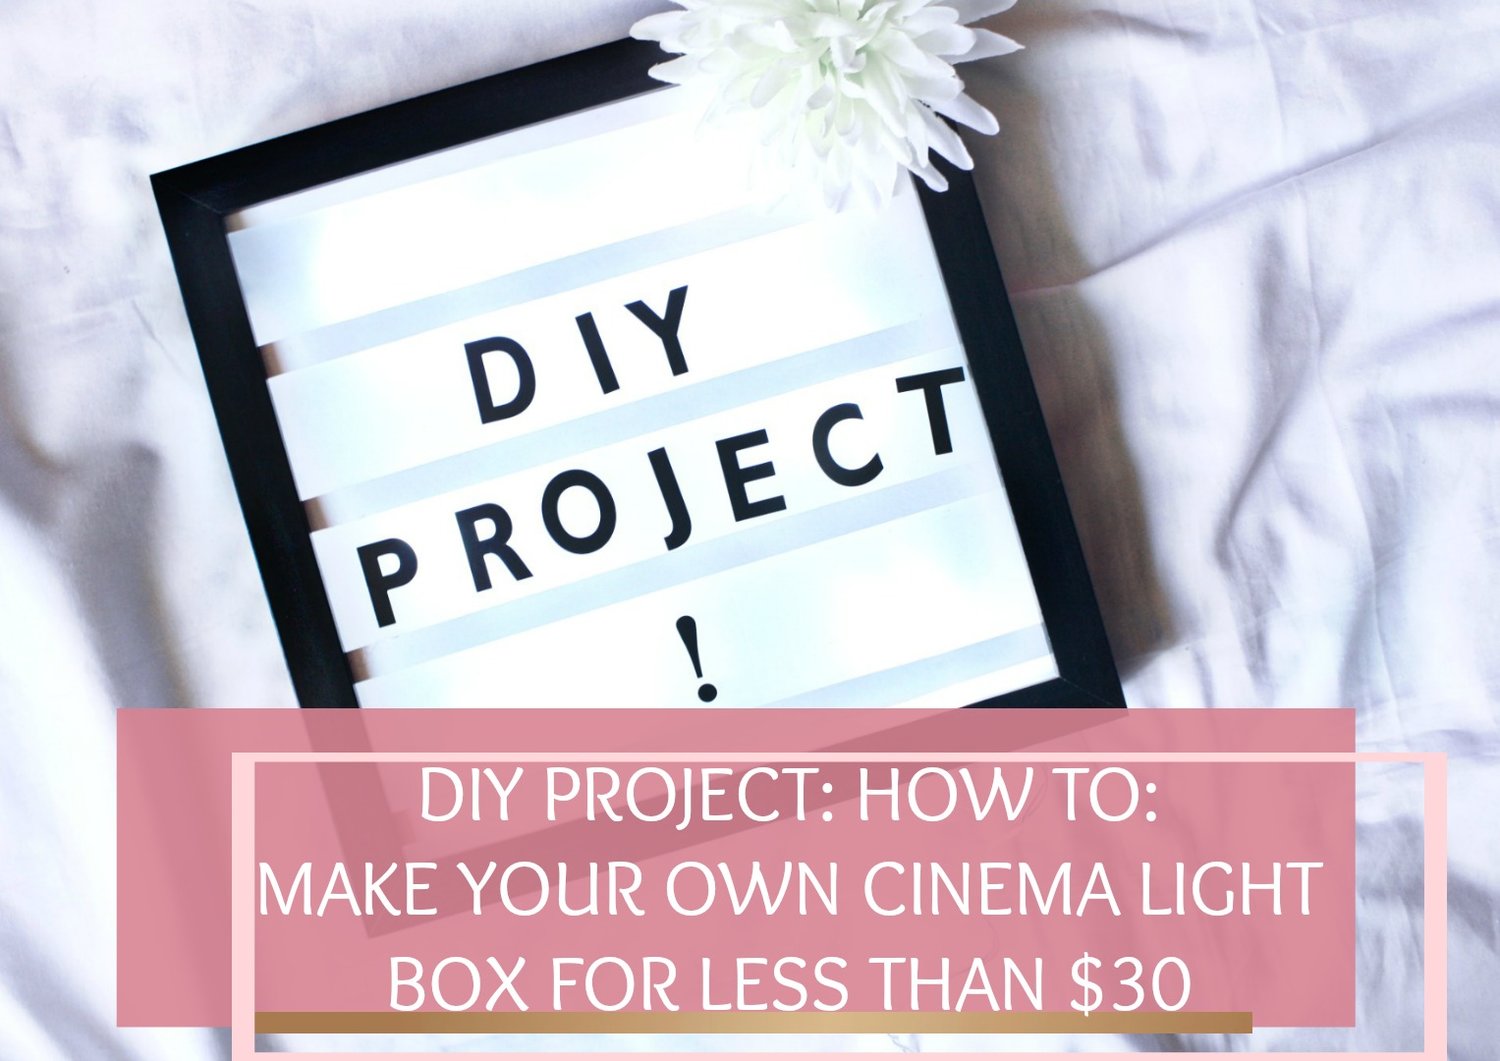 DIY Project: How To Make your own Cinema Light Box for Under $30! —  Ms.Polished Opinion